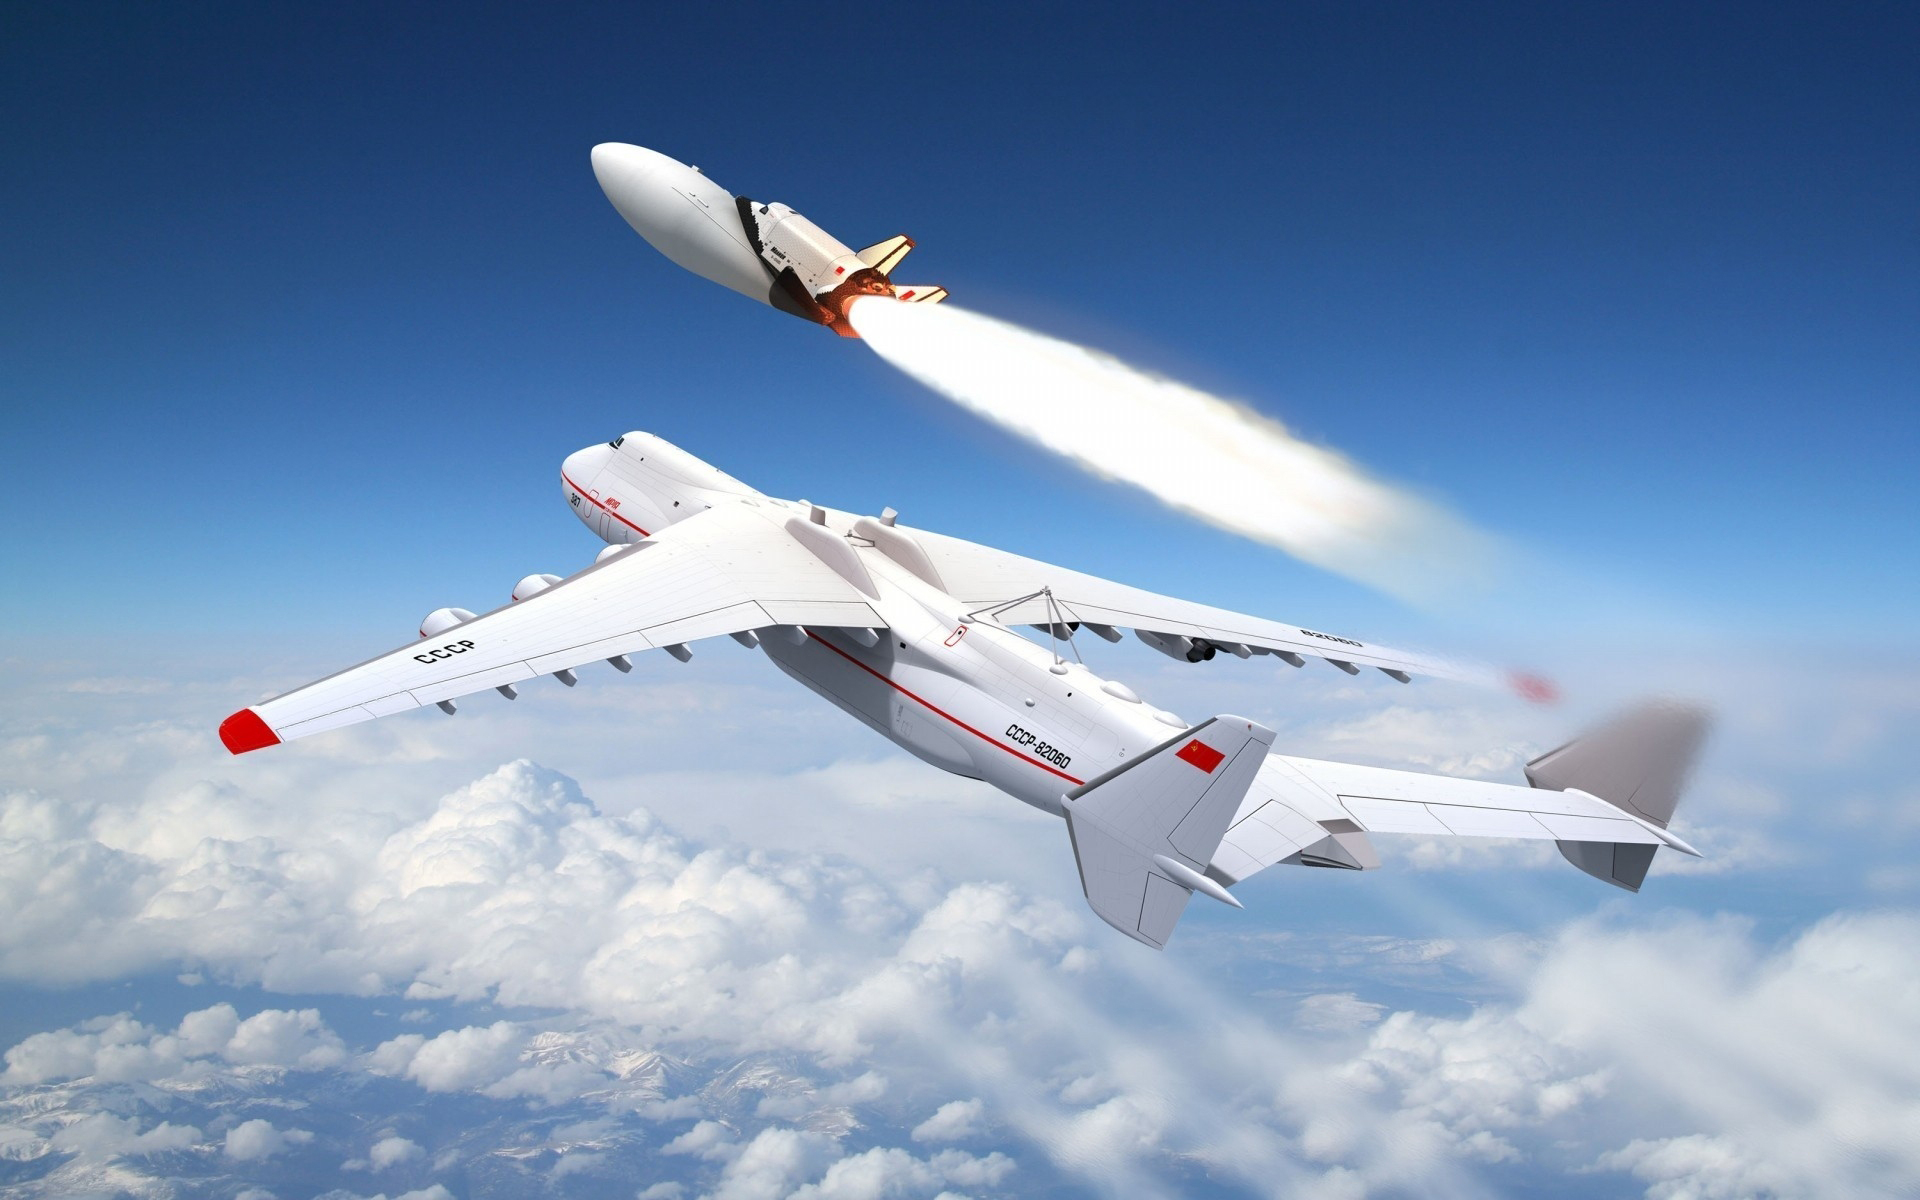 CCCP-82060 - Russians used it for carrying this Buran space shuttle